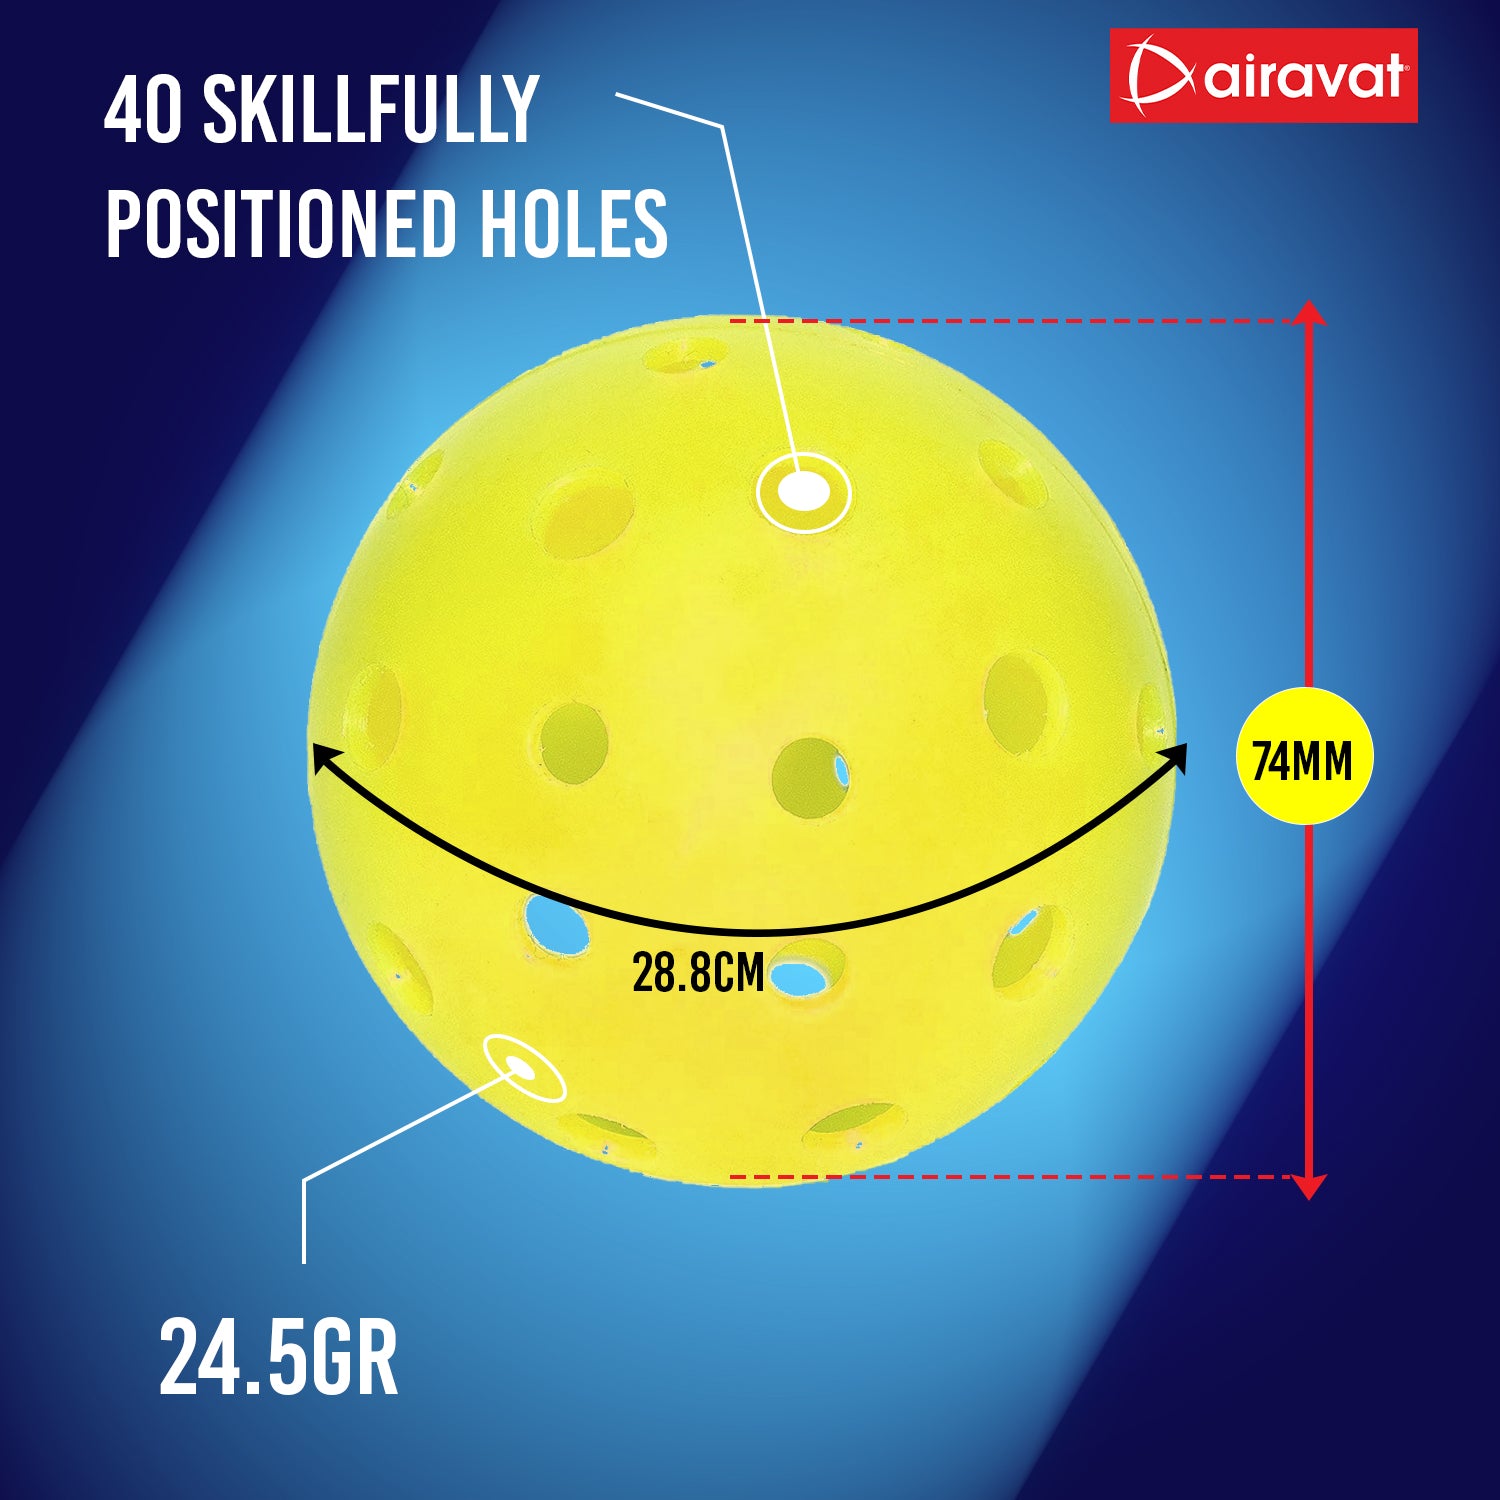 pickle ball dimension info yellow